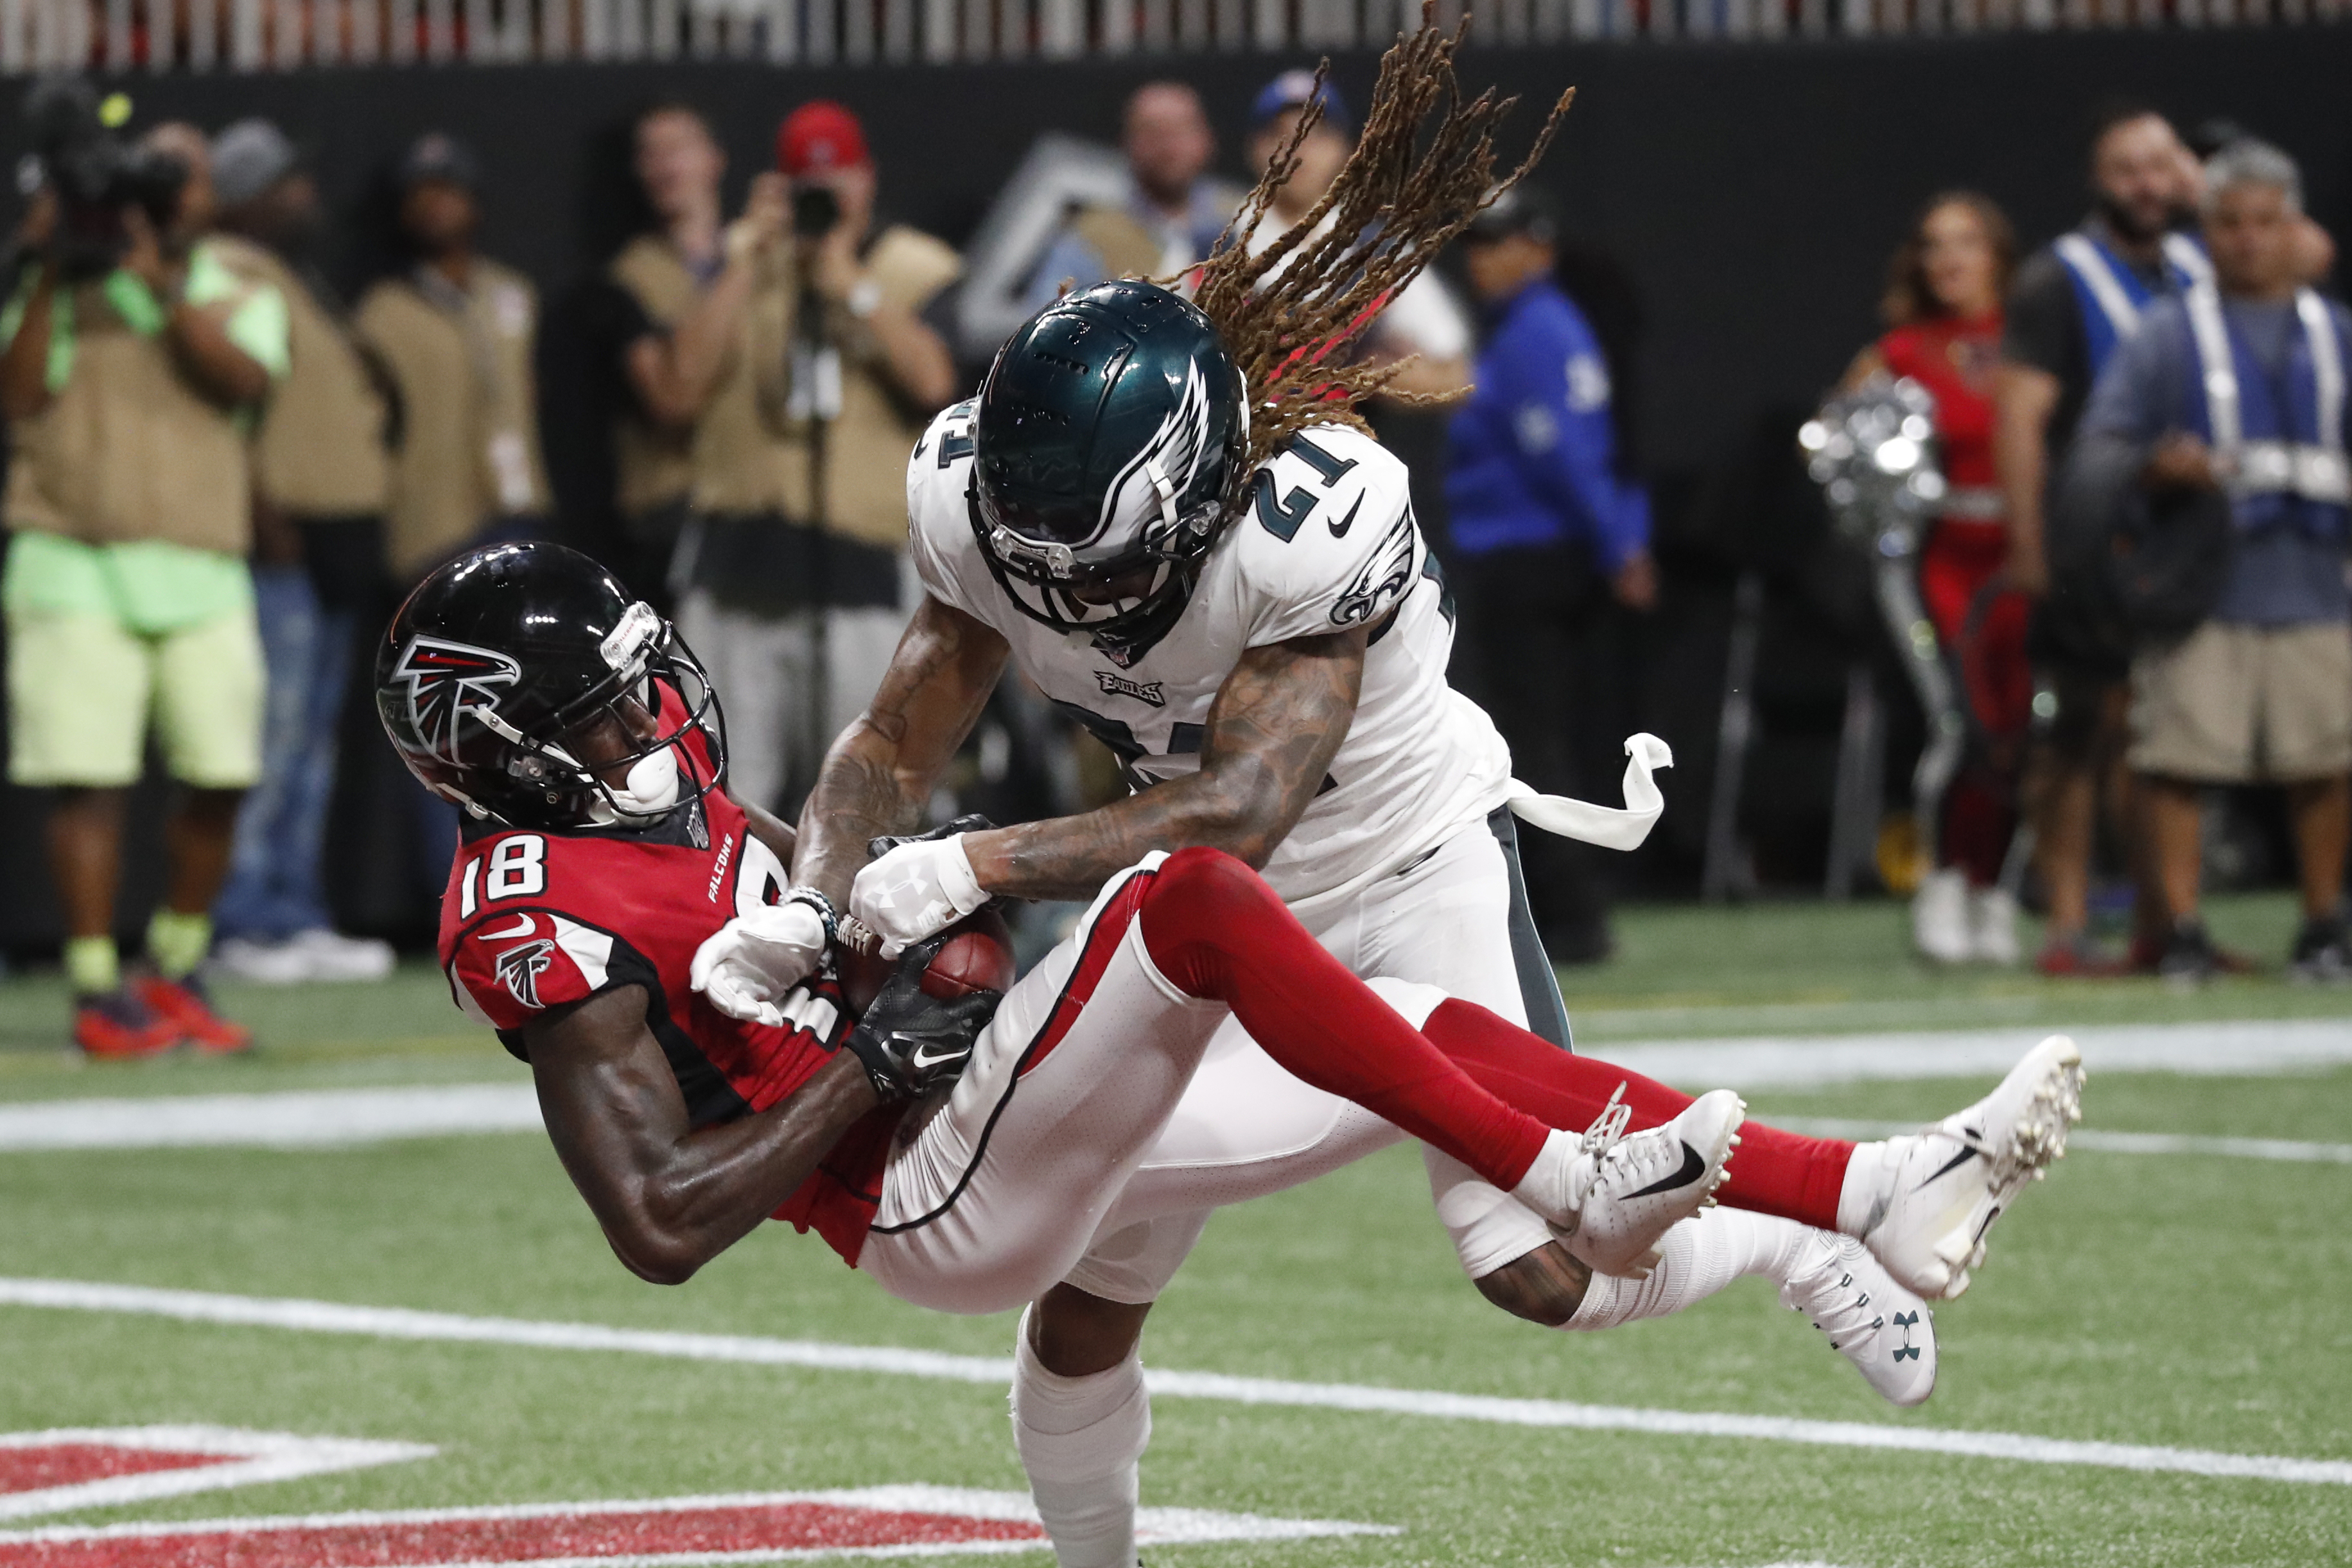 Atlanta Falcons WR Calvin Ridley Suspended For Betting On NFL Games